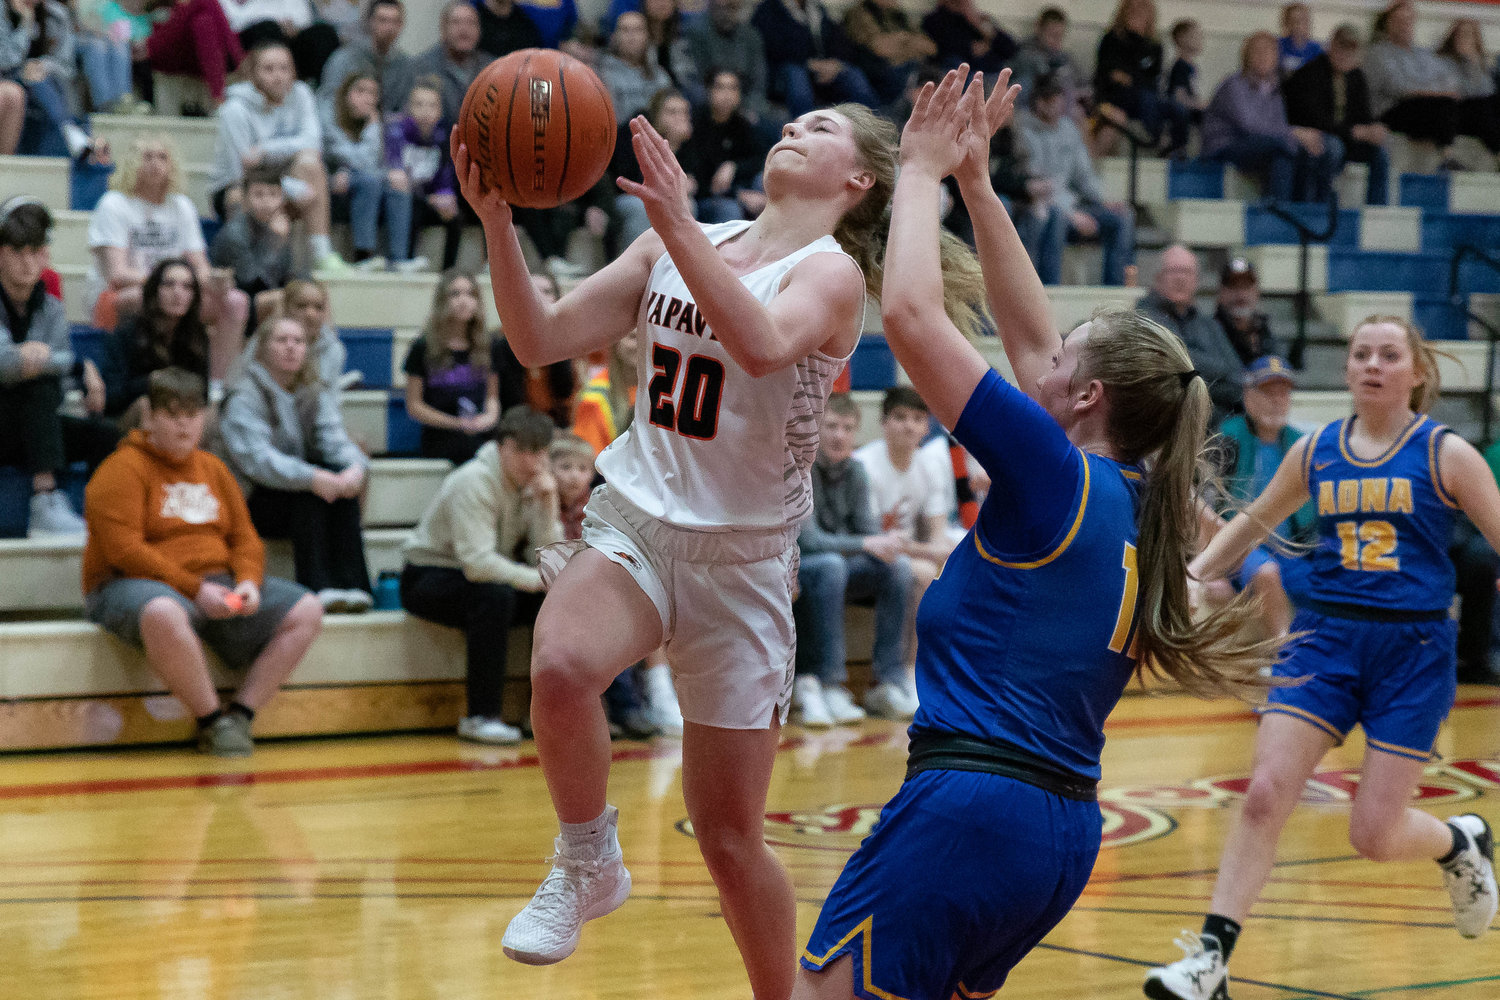 Napavine guard Morgan Hamilton drives for a layup against Adna at the MLK Classic in Longview at Lower Columbia College Jan. 16.